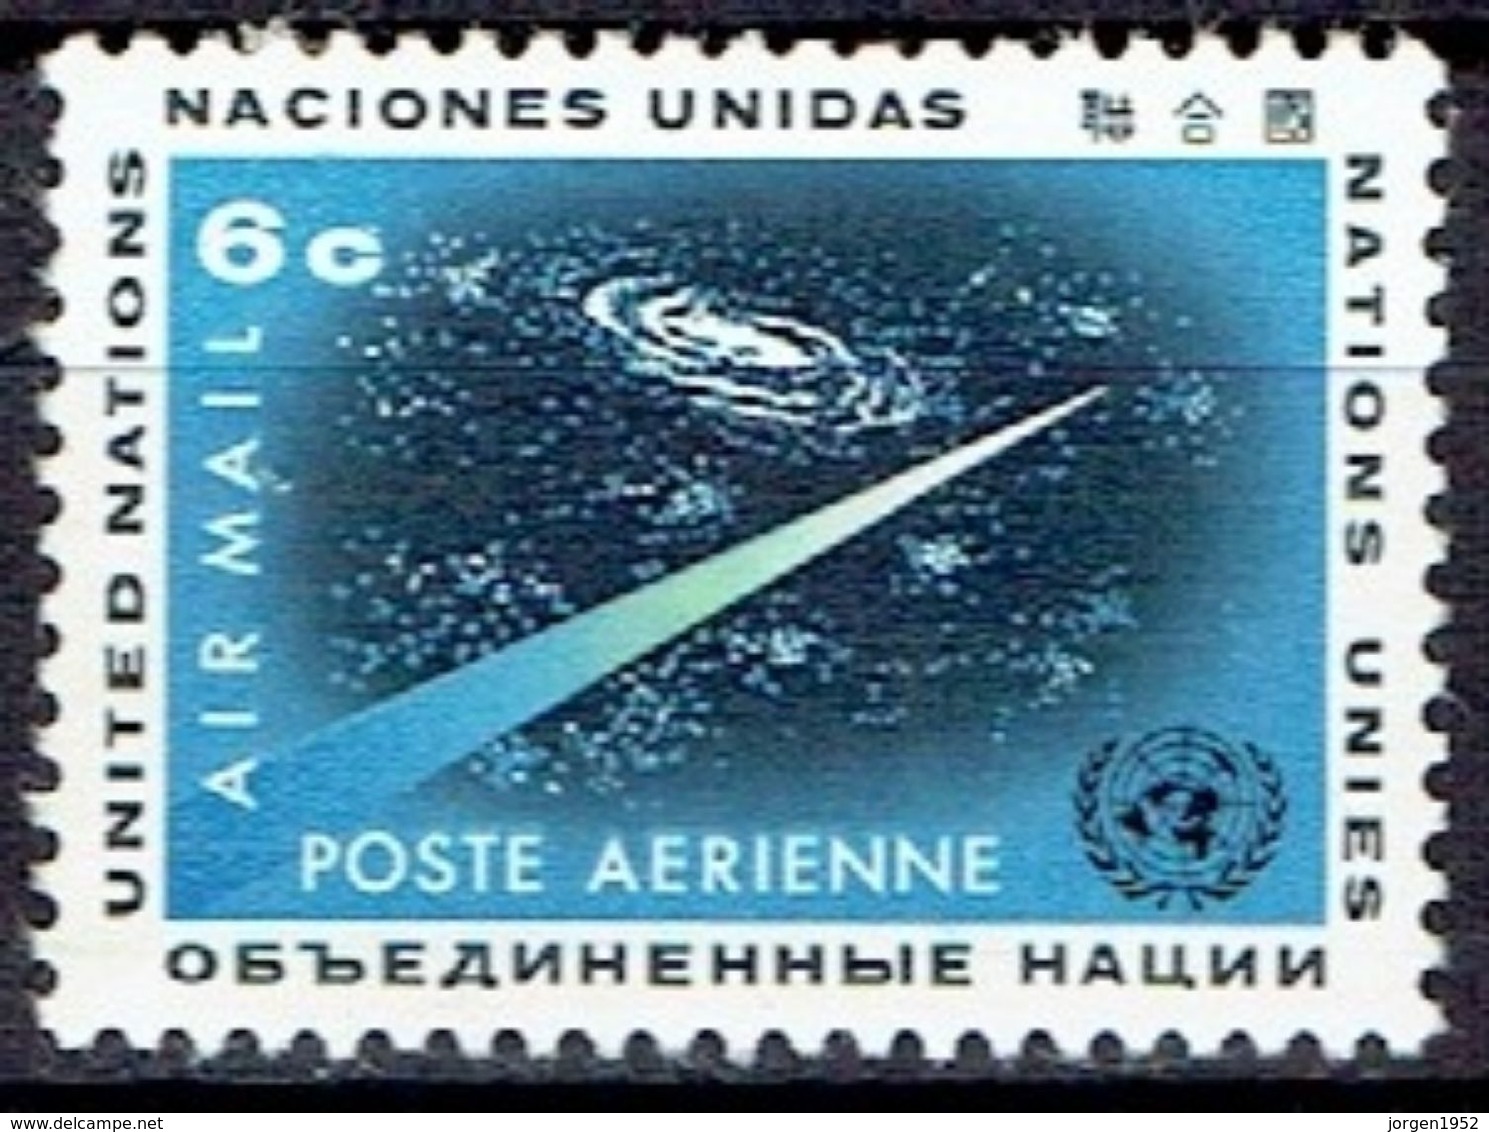 UNITED NATIONS # NEW YORK FROM 1963 STAMPWORLD 128* - Neufs